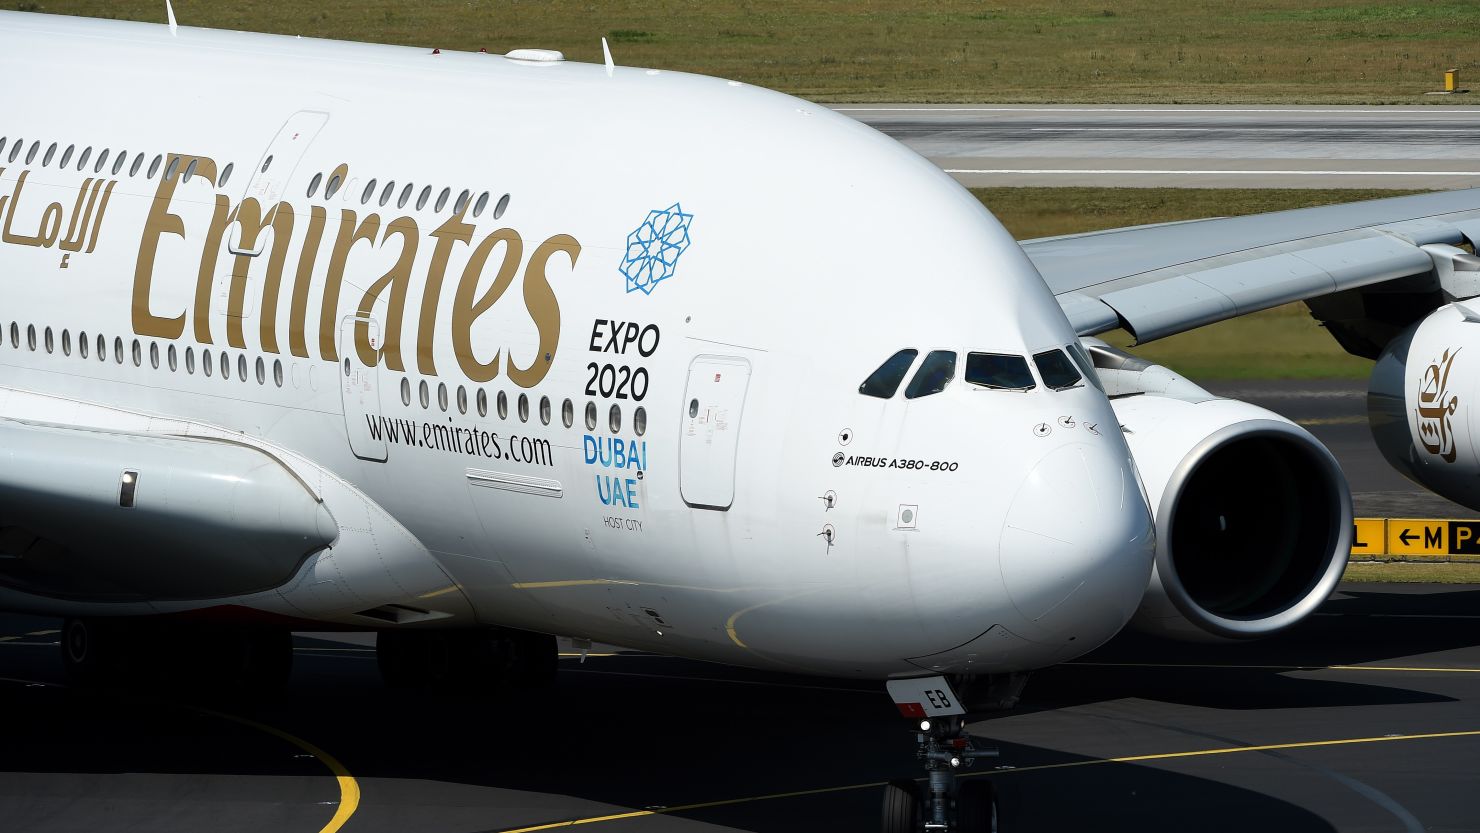 Emirates will operate its new Dubai-Panama City route with a Boeing 777-200LR aircraft. Pictured is an Airbus A 380.